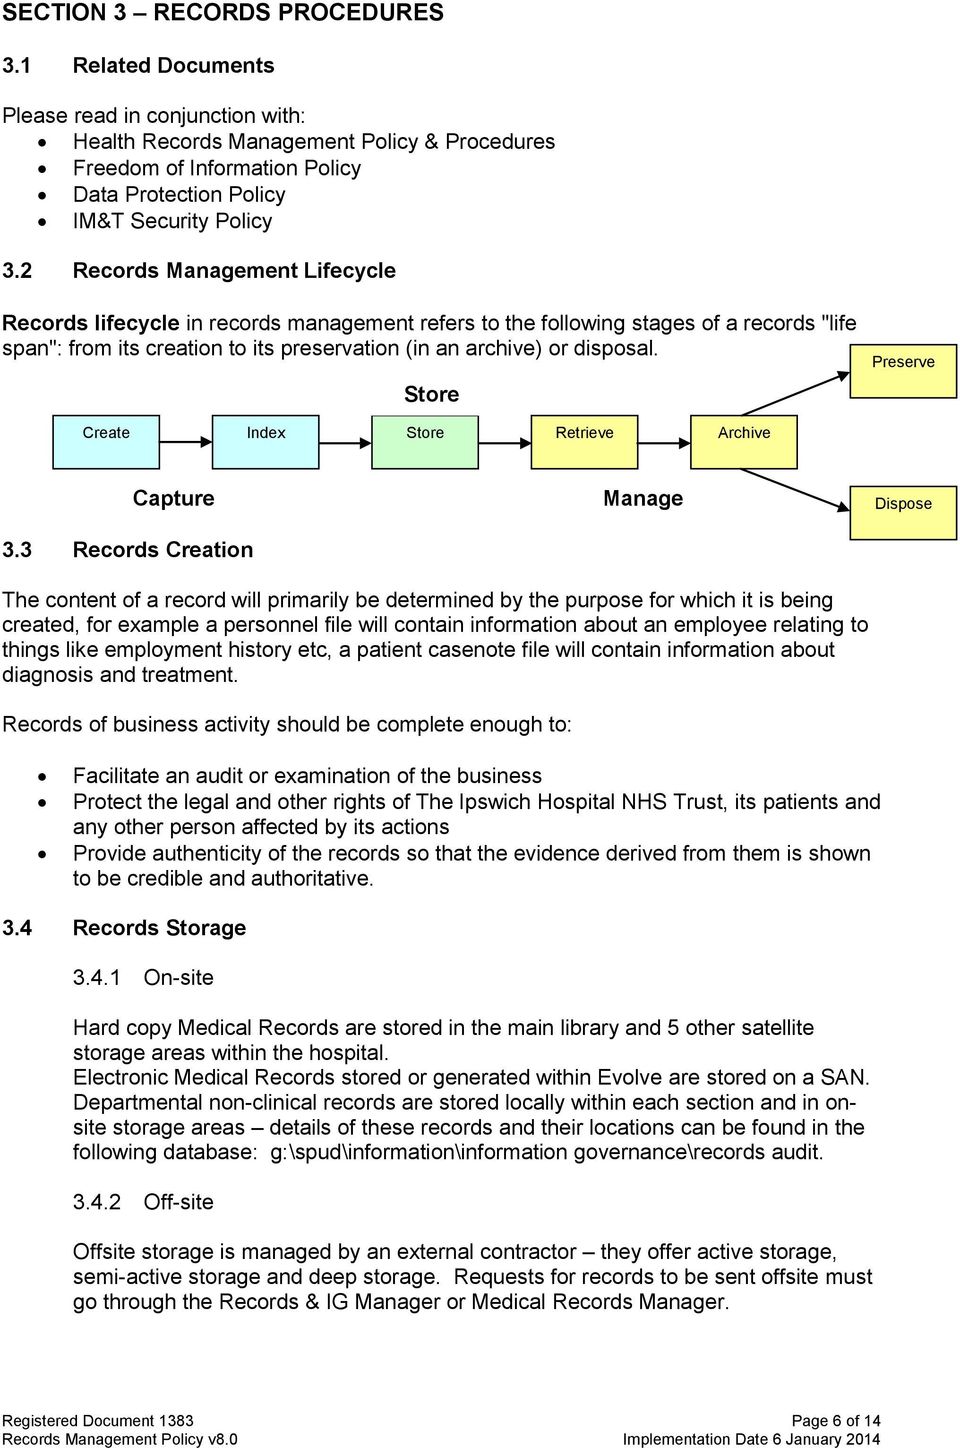 2 Records Management Lifecycle Records lifecycle in records management refers to the following stages of a records "life span": from its creation to its preservation (in an archive) or disposal.